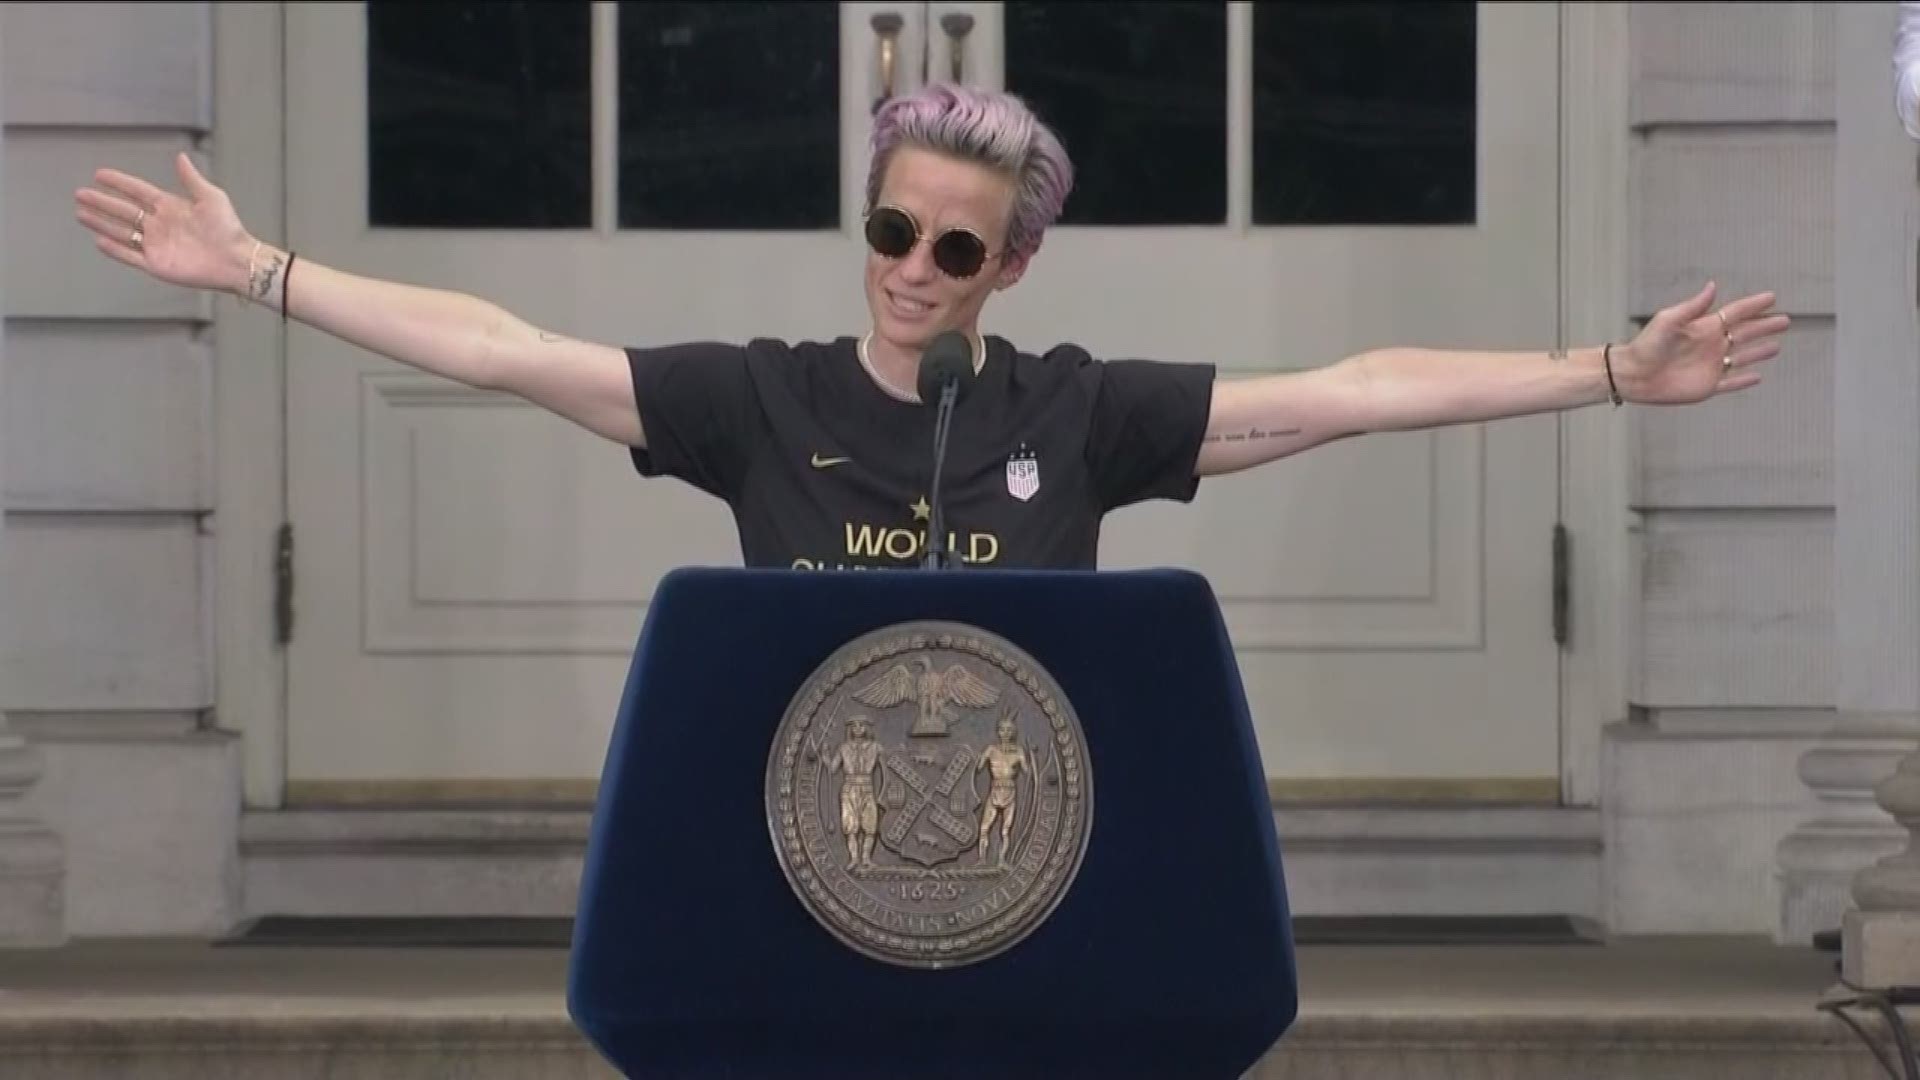 Women's World Cup hero Megan Rapinoe spoke at the victory parade held in New York City on July 10, 2019. Rapinoe and her teammates won the Women's World Cup earlier in the month.